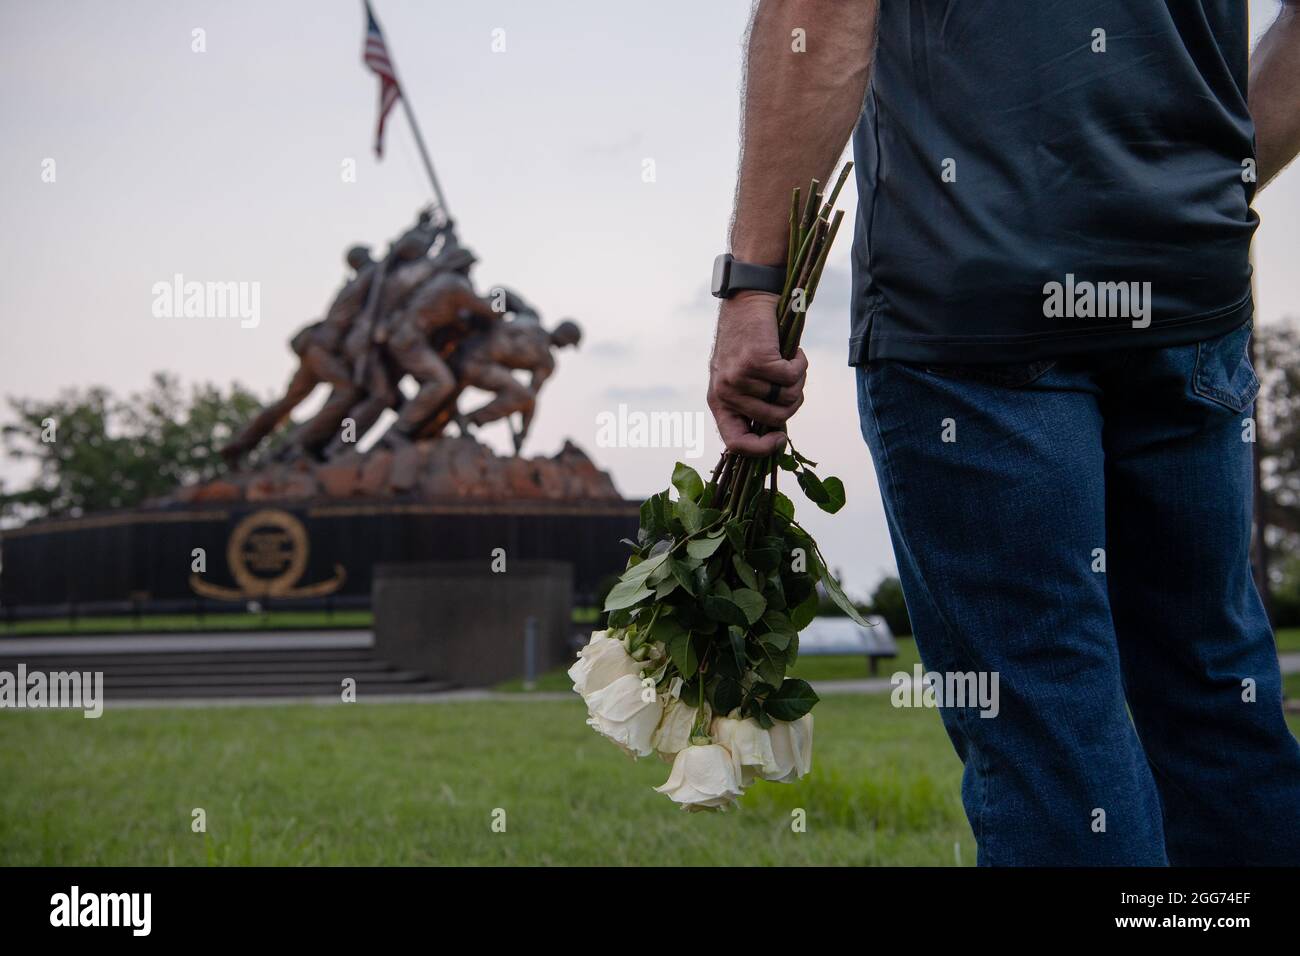 A candlelight vigil is held at the United States Marine Corps War Memorial, Arlington, Va. on Aug. 28, 2021, in memory of the U.S. service members that were lost in the Aug. 26, 2021 attack at Hamid Karzai International Airport in Kabul, Afghanistan. (U.S. Marine Corps photo by Staff Sgt. Kelly L. Timney) Stock Photo